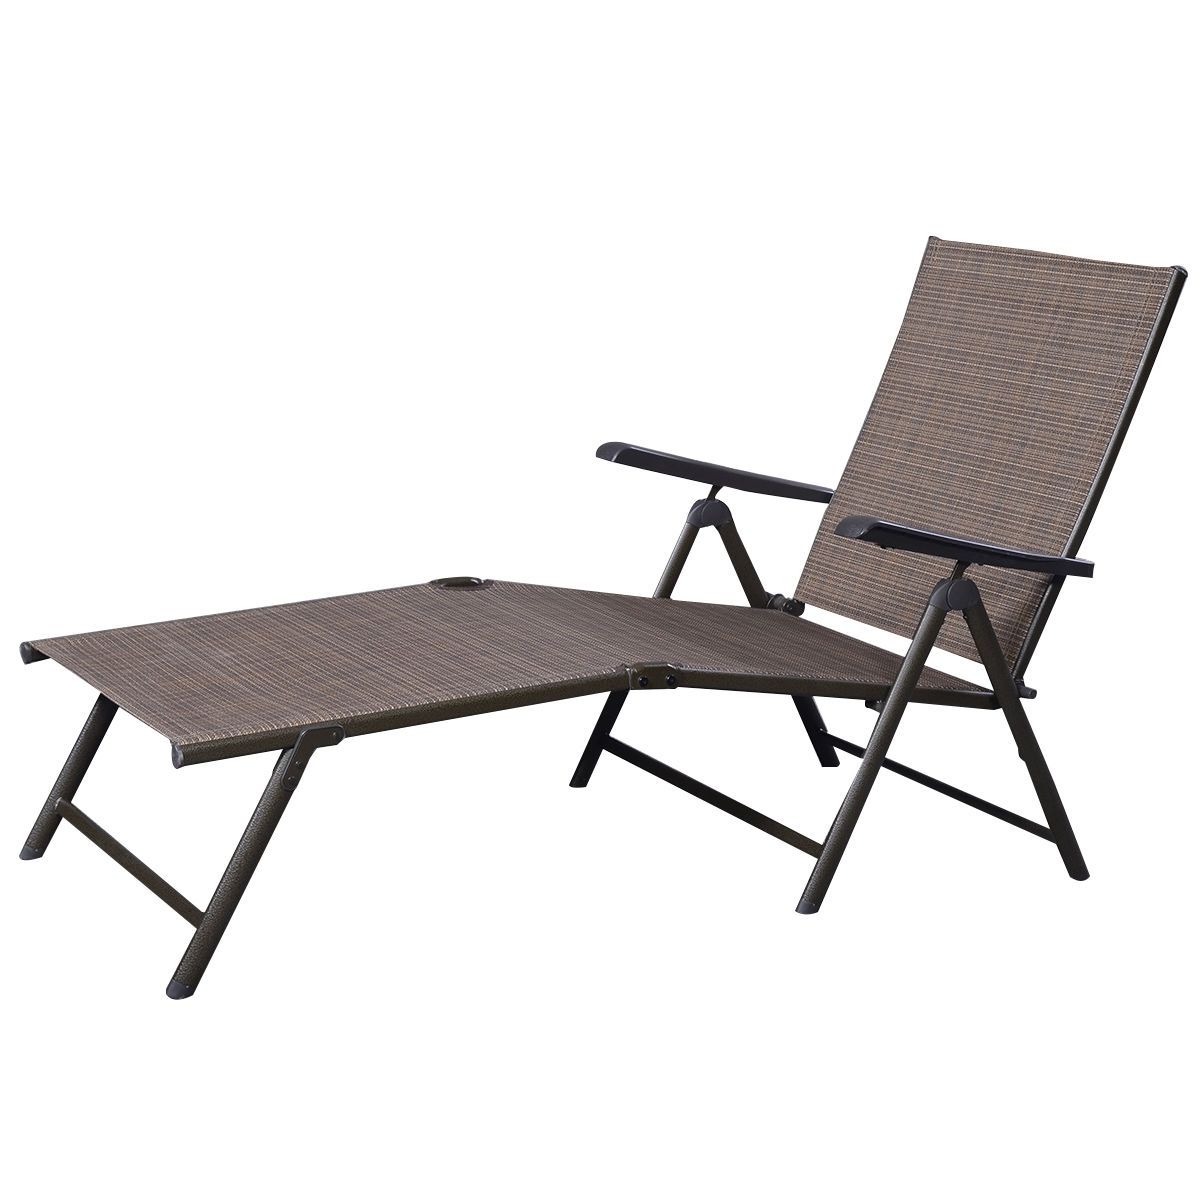 Most Recent Outdoor Adjustable Chaise Lounge Chair Sunloungers Patio Chairs Within Chaise Lounge Chairs At Target (View 6 of 15)